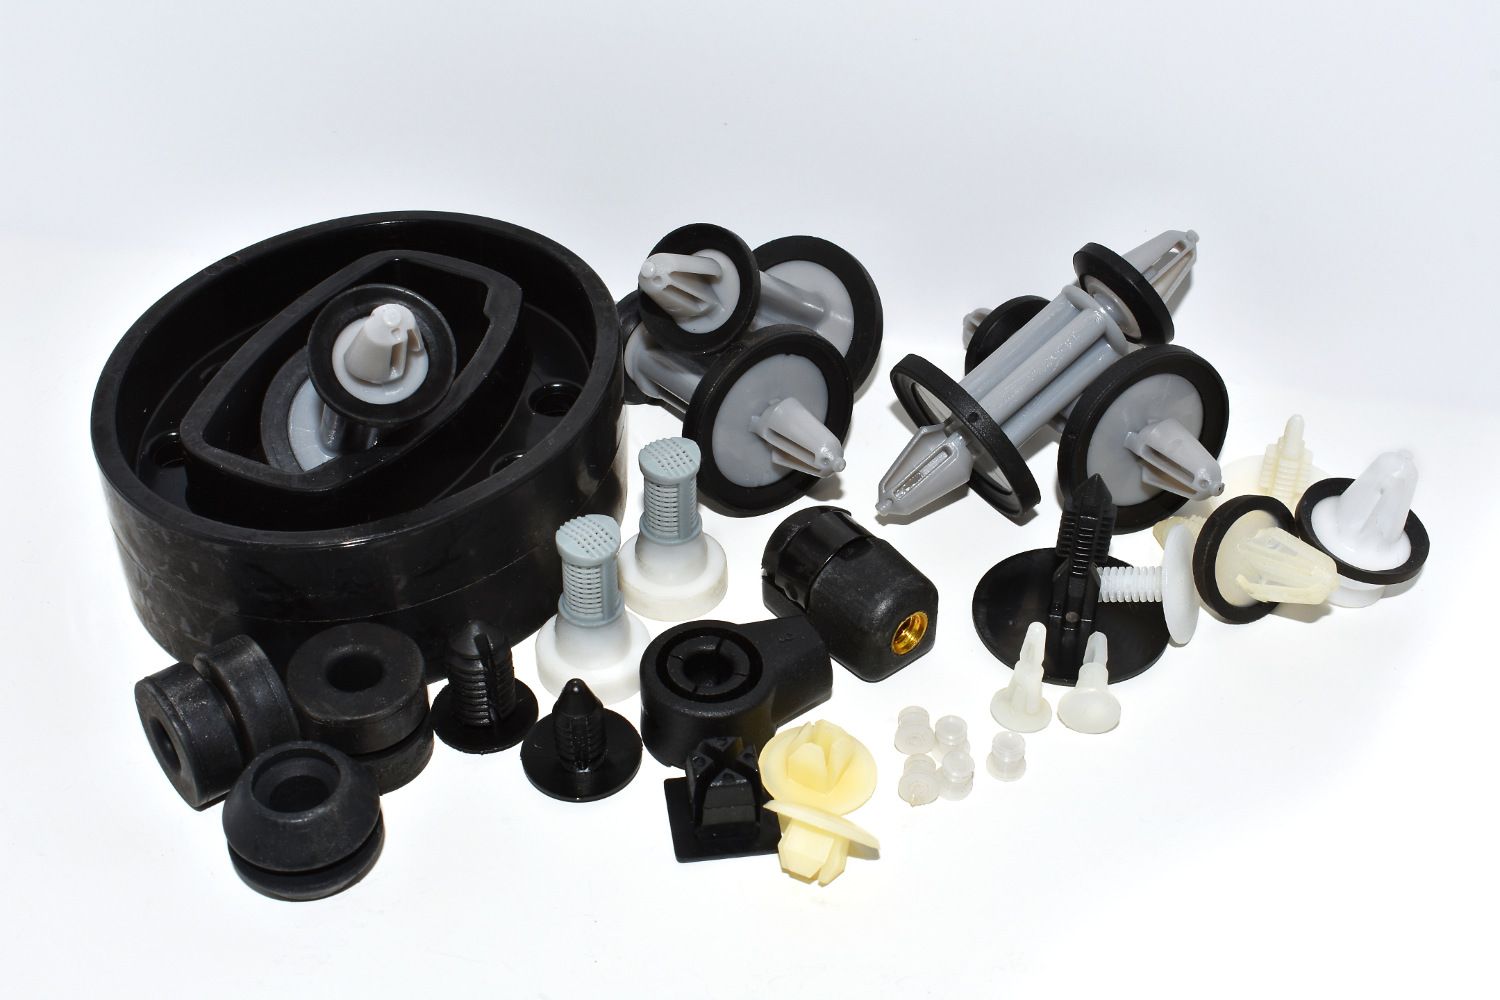 Plastic and Rubber Assembly Components - Carrdan Corporation